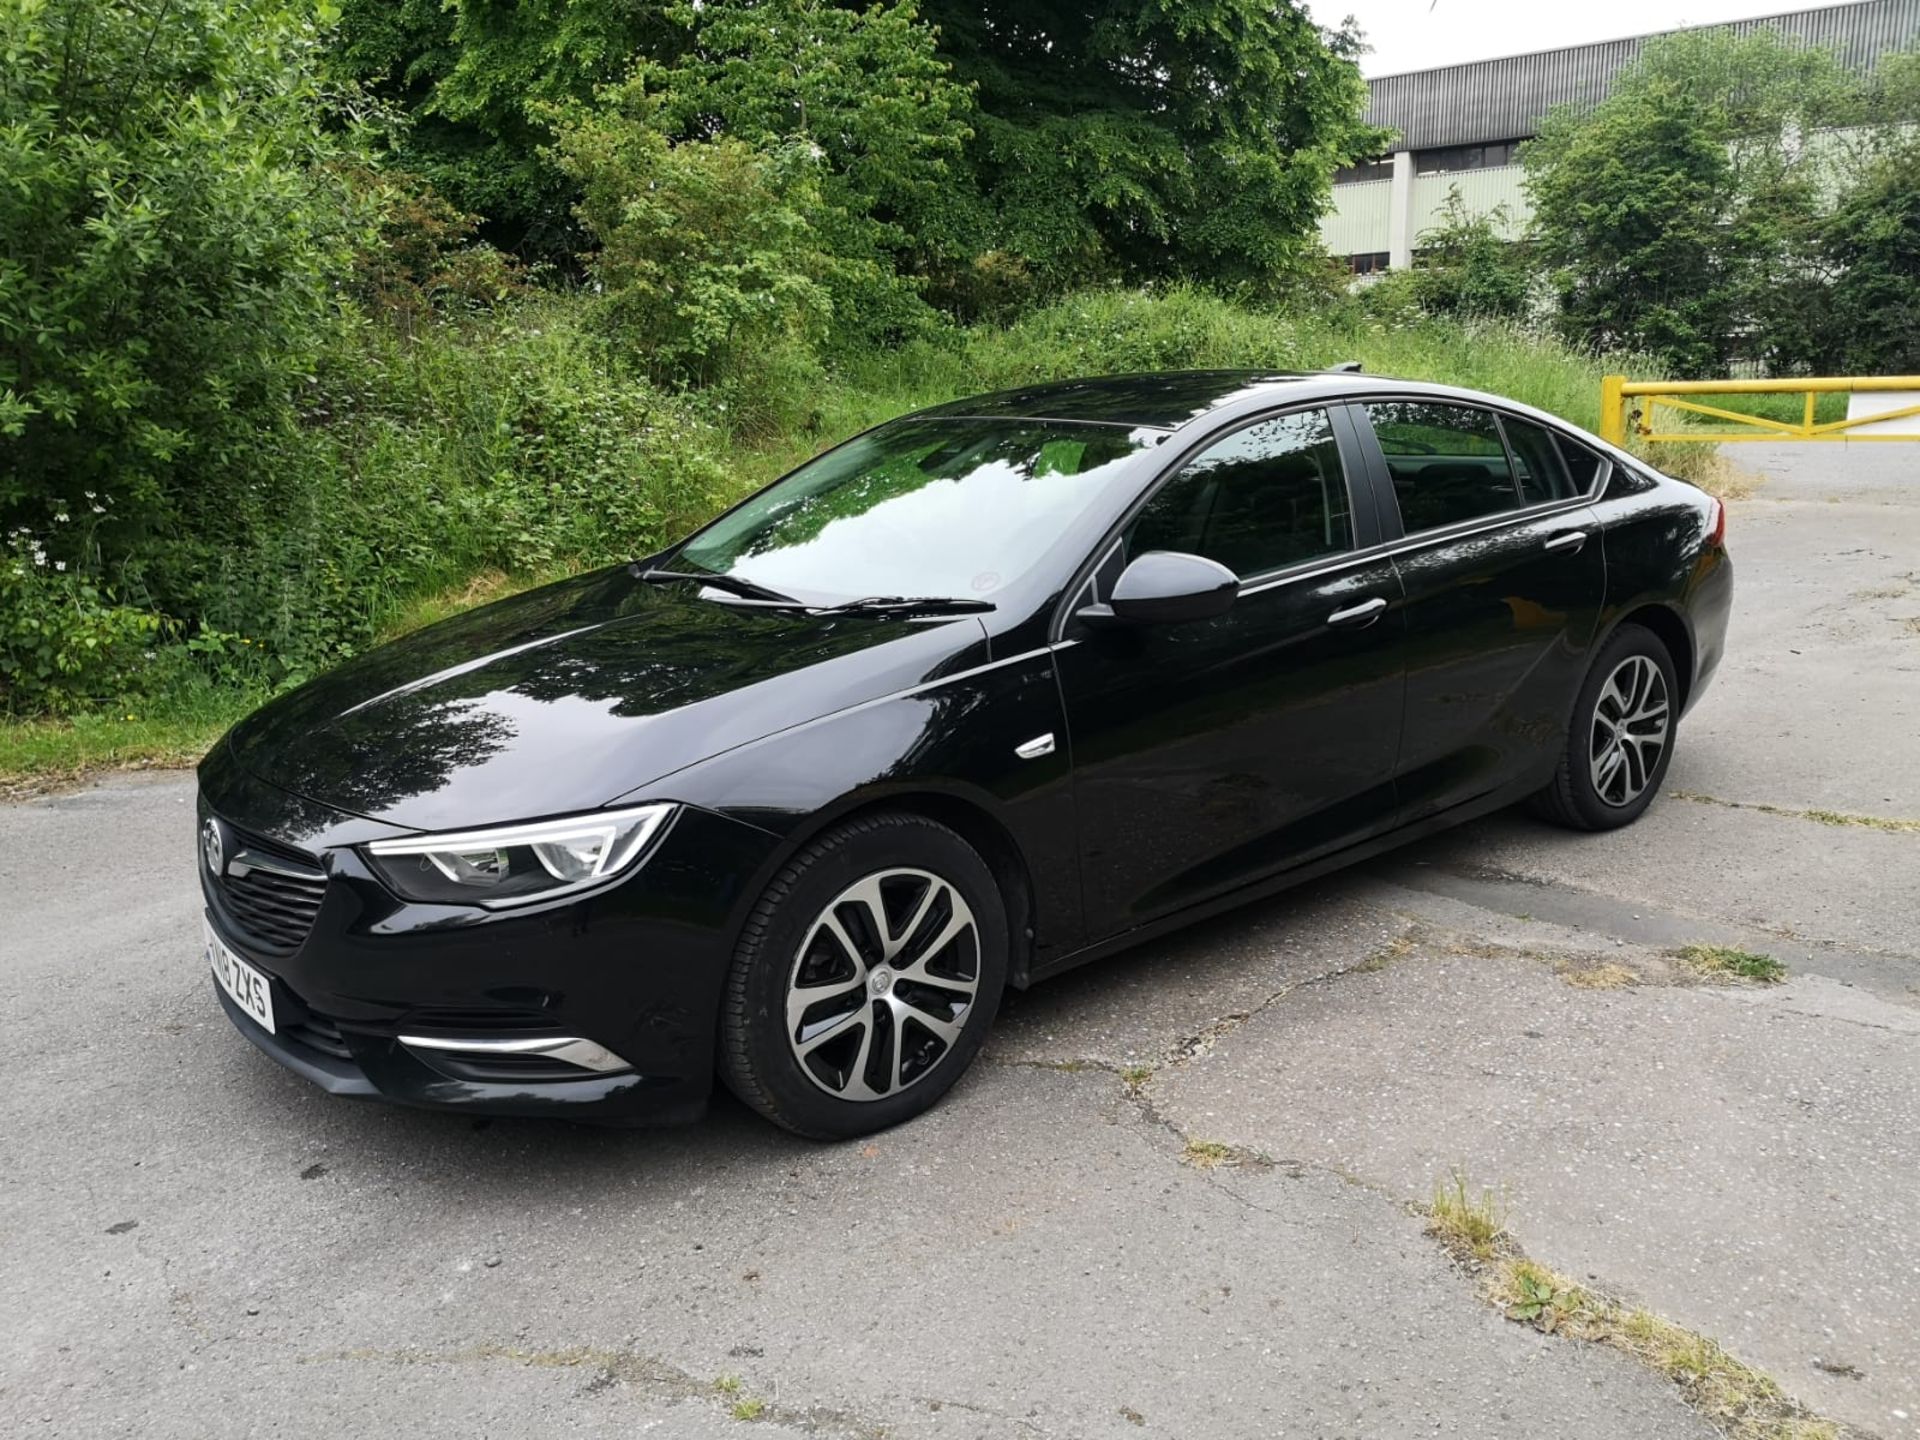 2018/18 REG VAUXHALL INSIGNIA DESIGN ECOTEC TURBO 1.6 DIESEL, SHOWING 0 FORMER KEEPERS *NO VAT* - Image 3 of 16